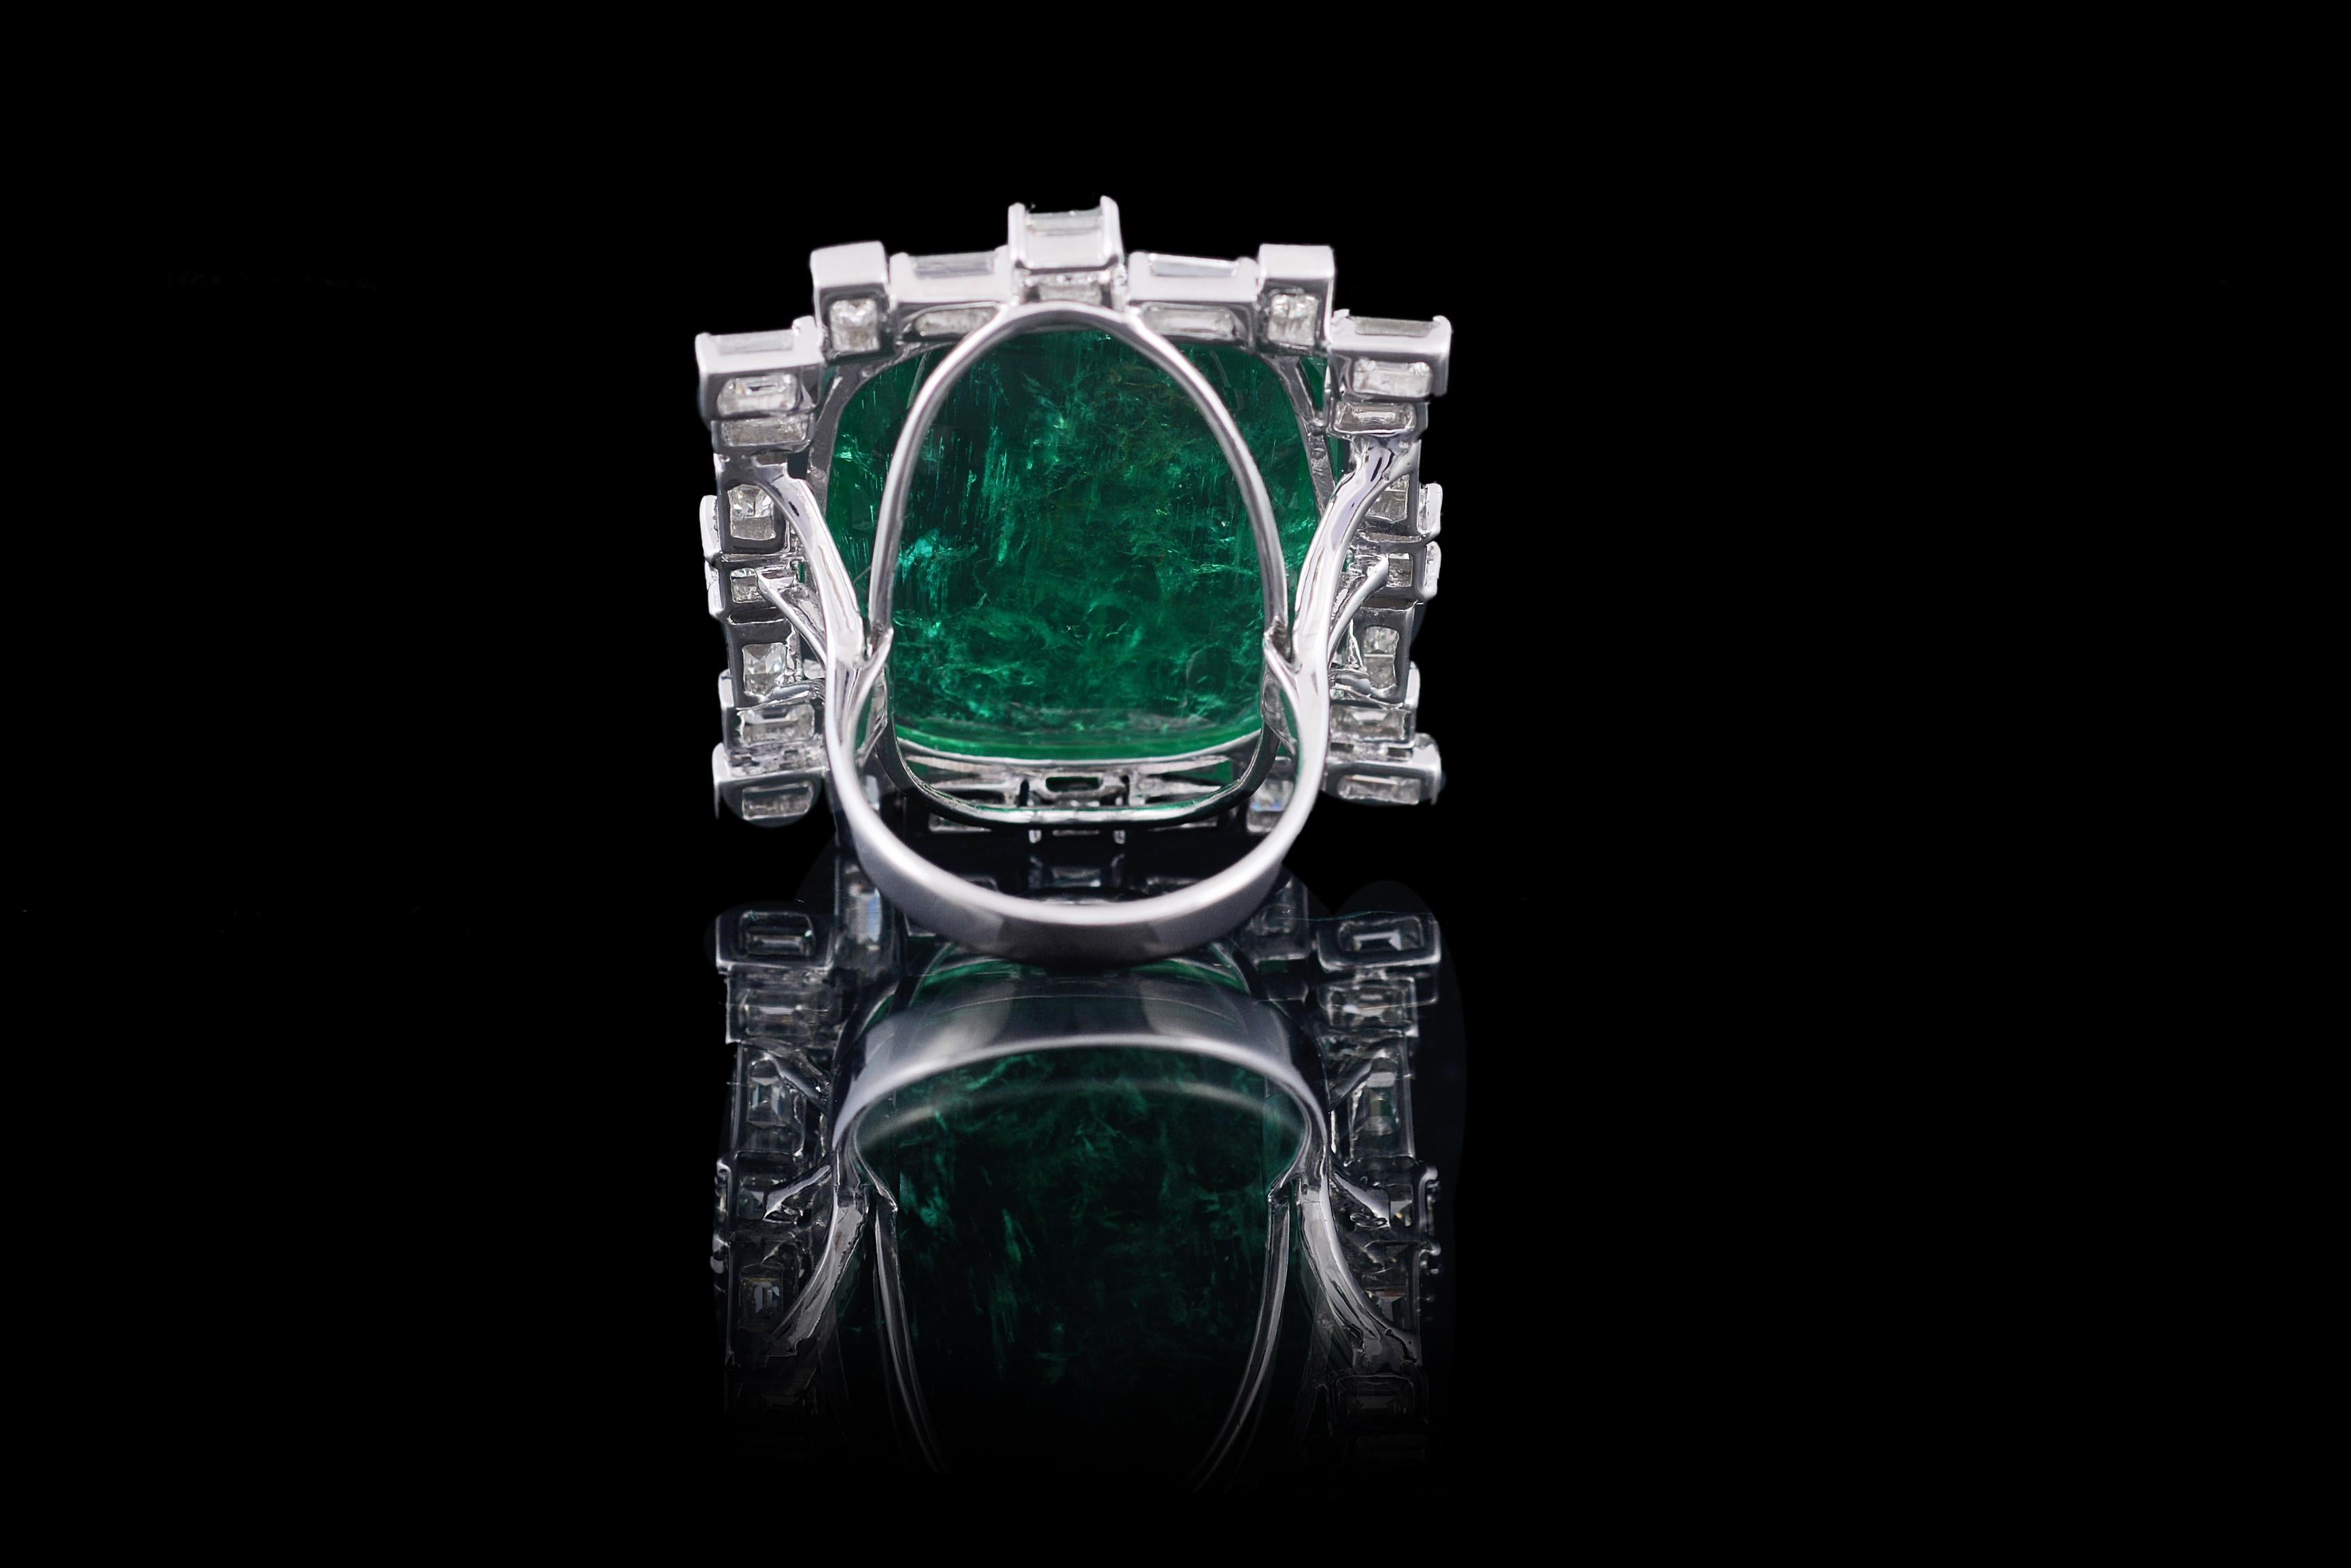 A classic Emerald & Diamond cocktail ring set in 18K Gold and Baguette Diamonds. The weight of the Emerald is 30.88 carats and is a completely natural from Zambia. The emerald is without any treatment. The weight of the diamonds is 3.85 carats. The